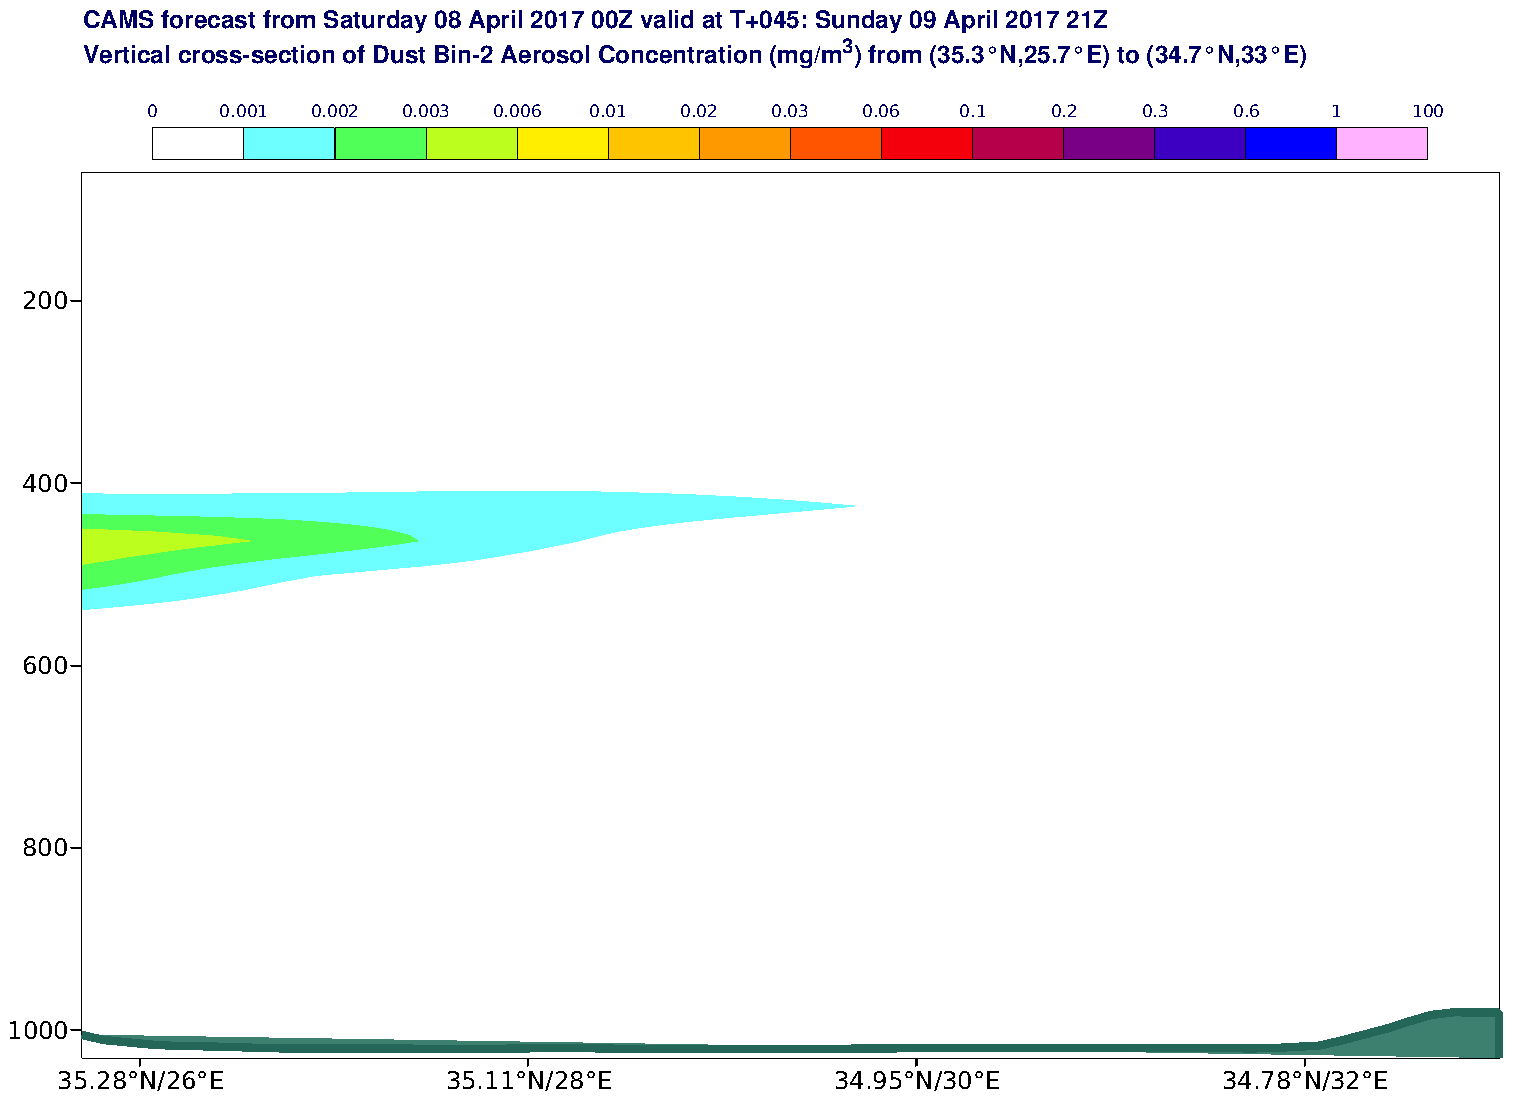 Vertical cross-section of Dust Bin-2 Aerosol Concentration (mg/m3) valid at T45 - 2017-04-09 21:00